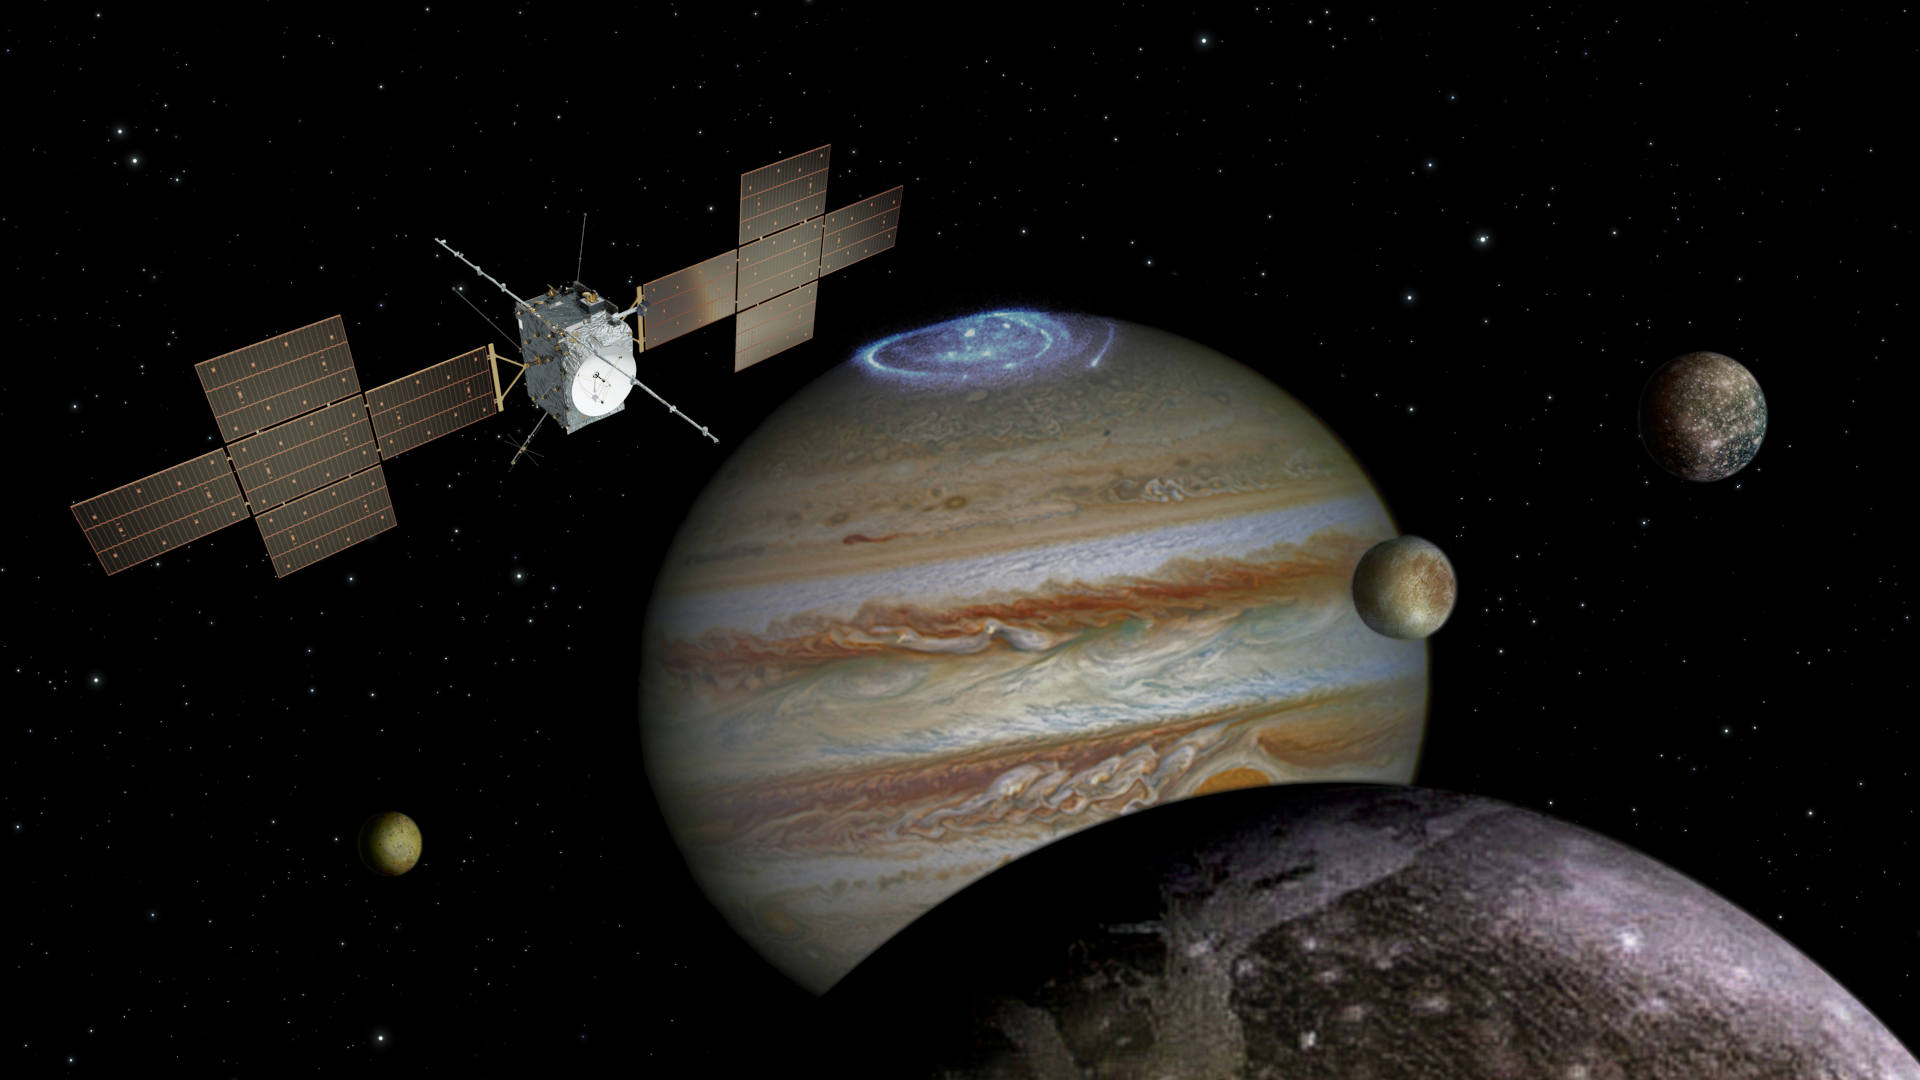 JUICE space probe with DLR instruments on its way to Kourou cosmodrome: ESA mission probe will be launched in April to Jupiter to study the planet and its icy moons, especially Ganymede